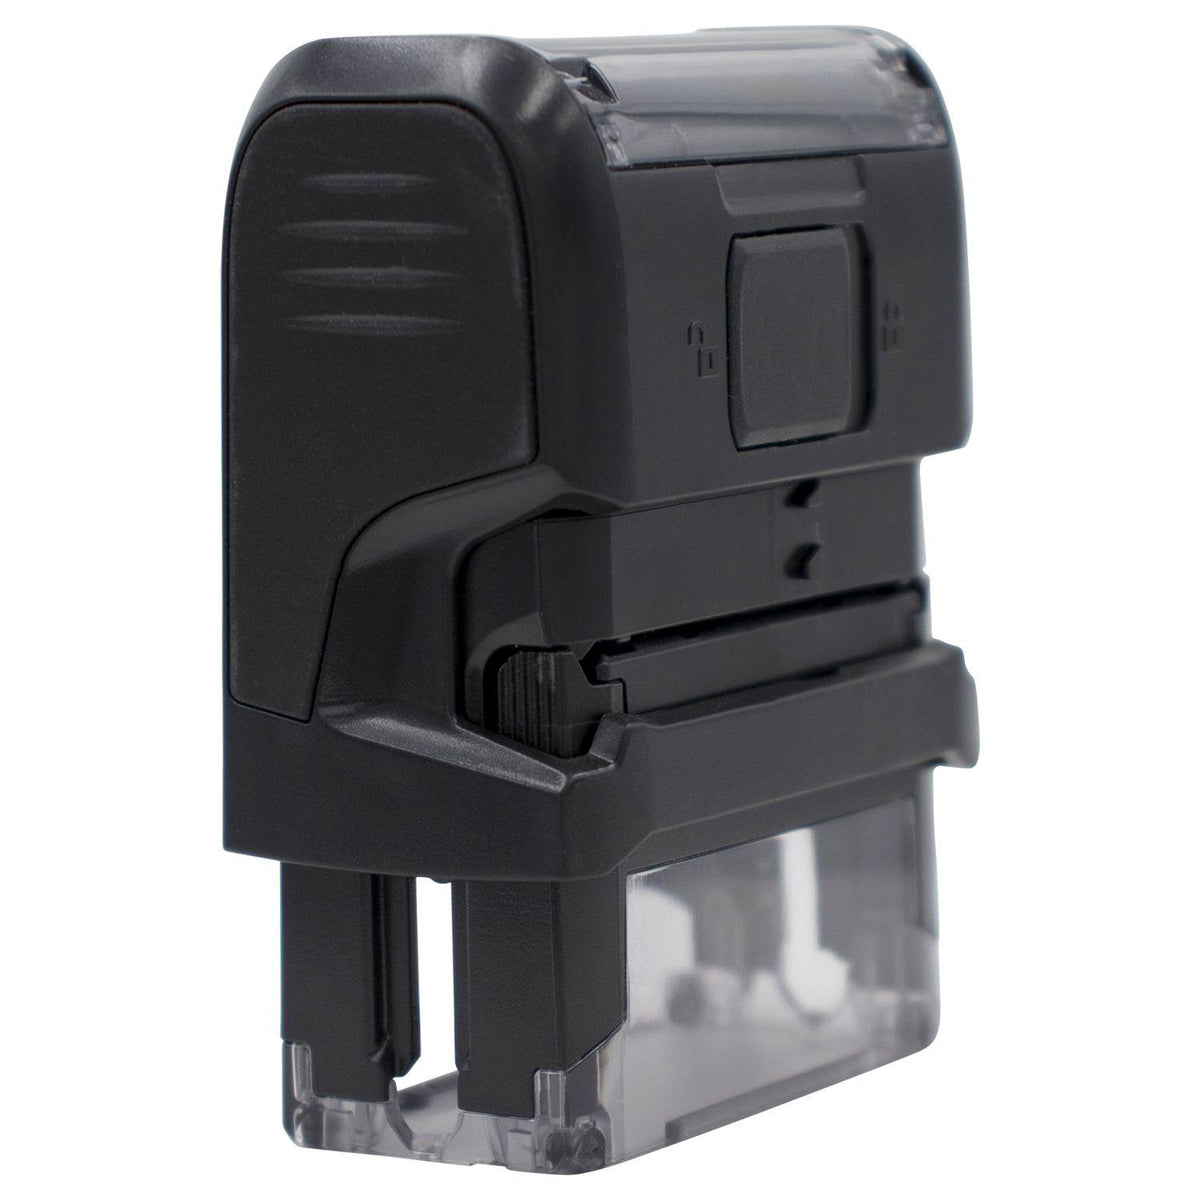 Self Inking COD Stamp - Engineer Seal Stamps - Brand_Trodat, Impression Size_Small, Stamp Type_Self-Inking Stamp, Type of Use_Business, Type of Use_Finance, Type of Use_Office